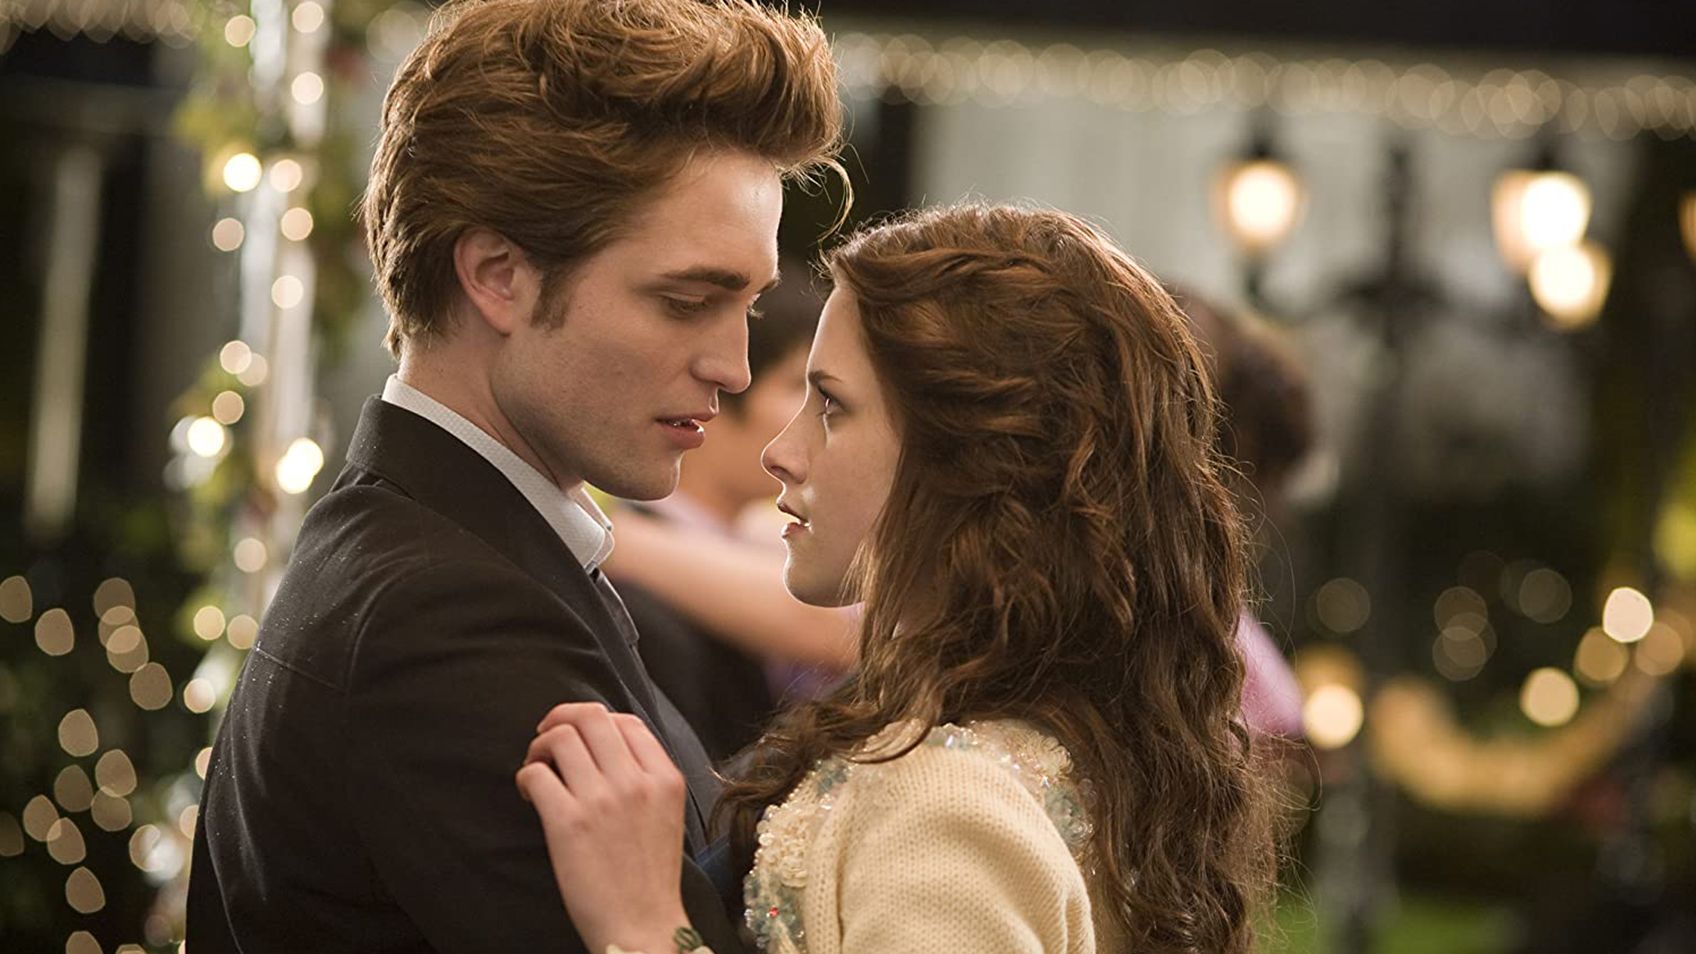 Remember these two? Robert Pattinson and Kristen Stewart played Edward and Bella in the "Twilight" film series. 